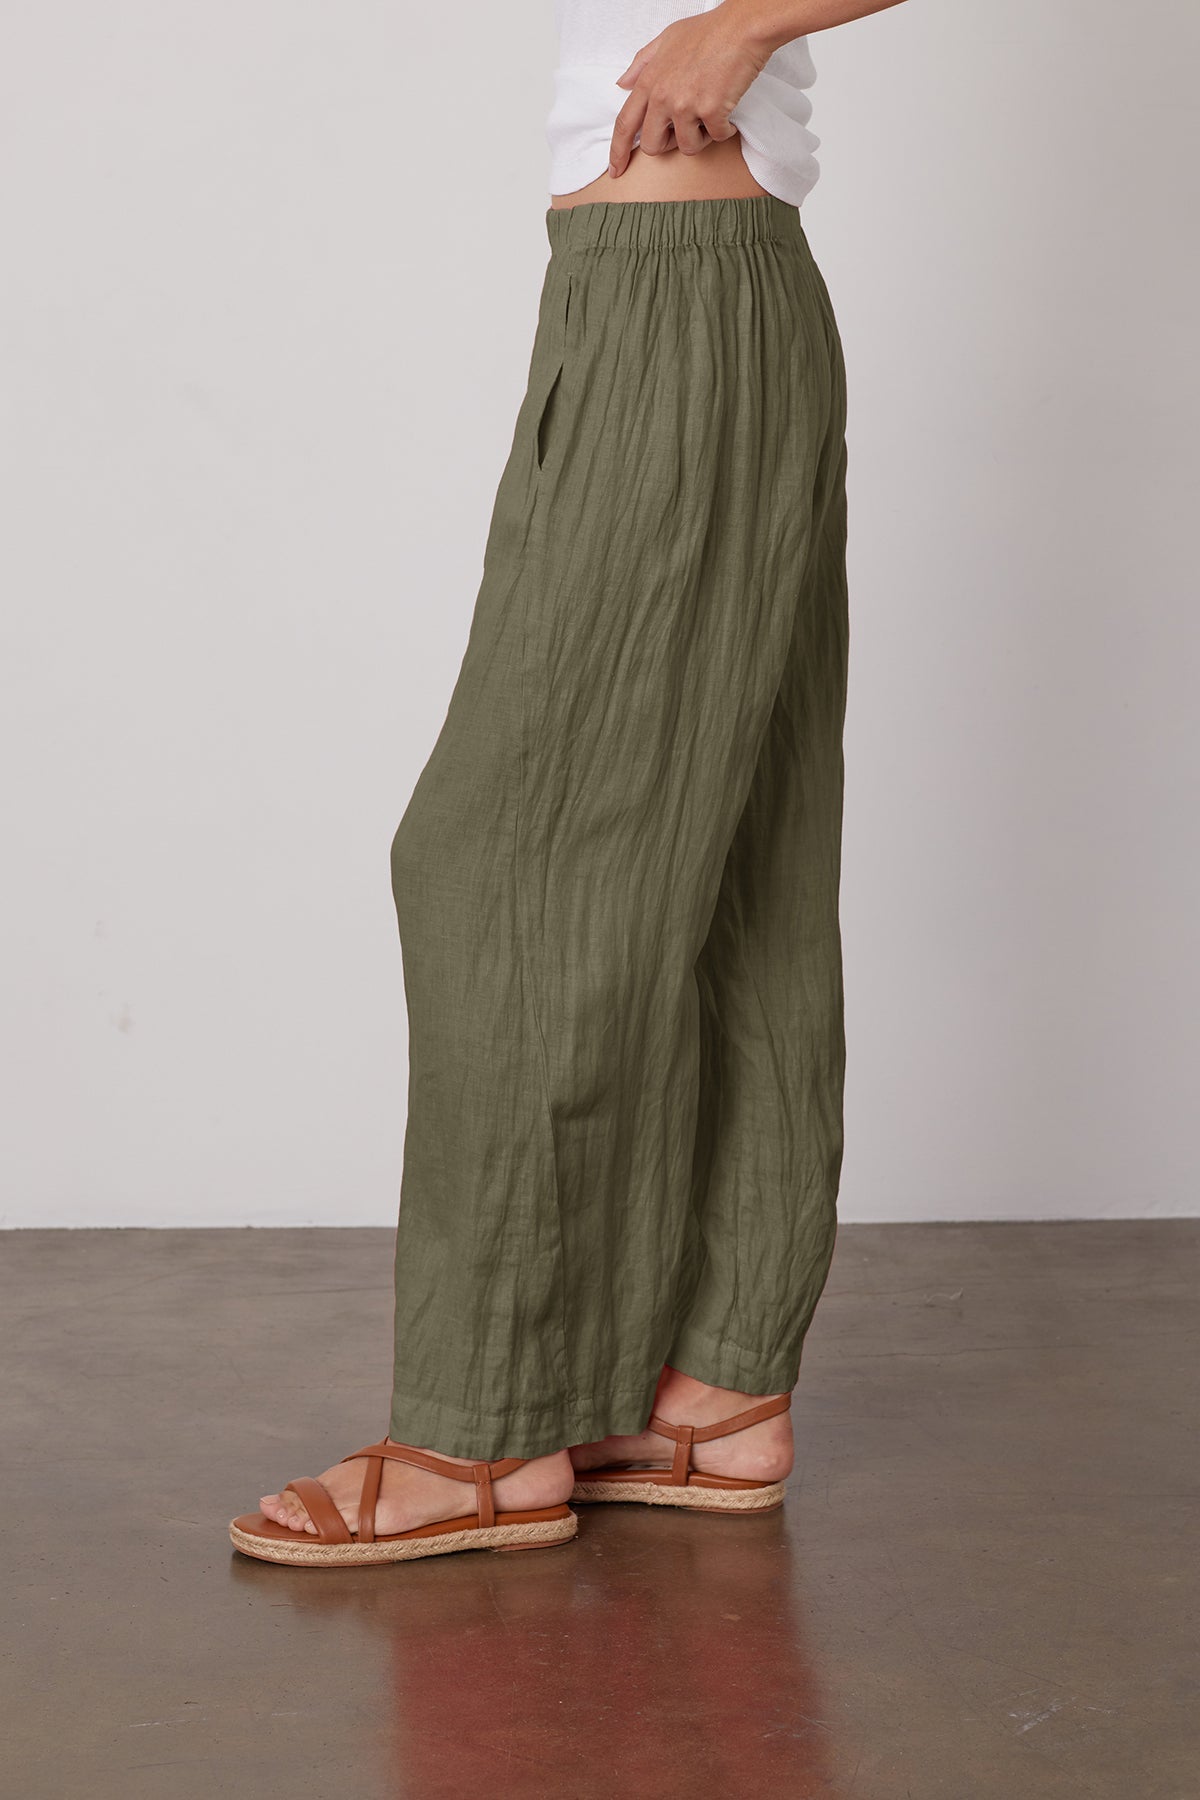   Lola linen pant in olive green side. 